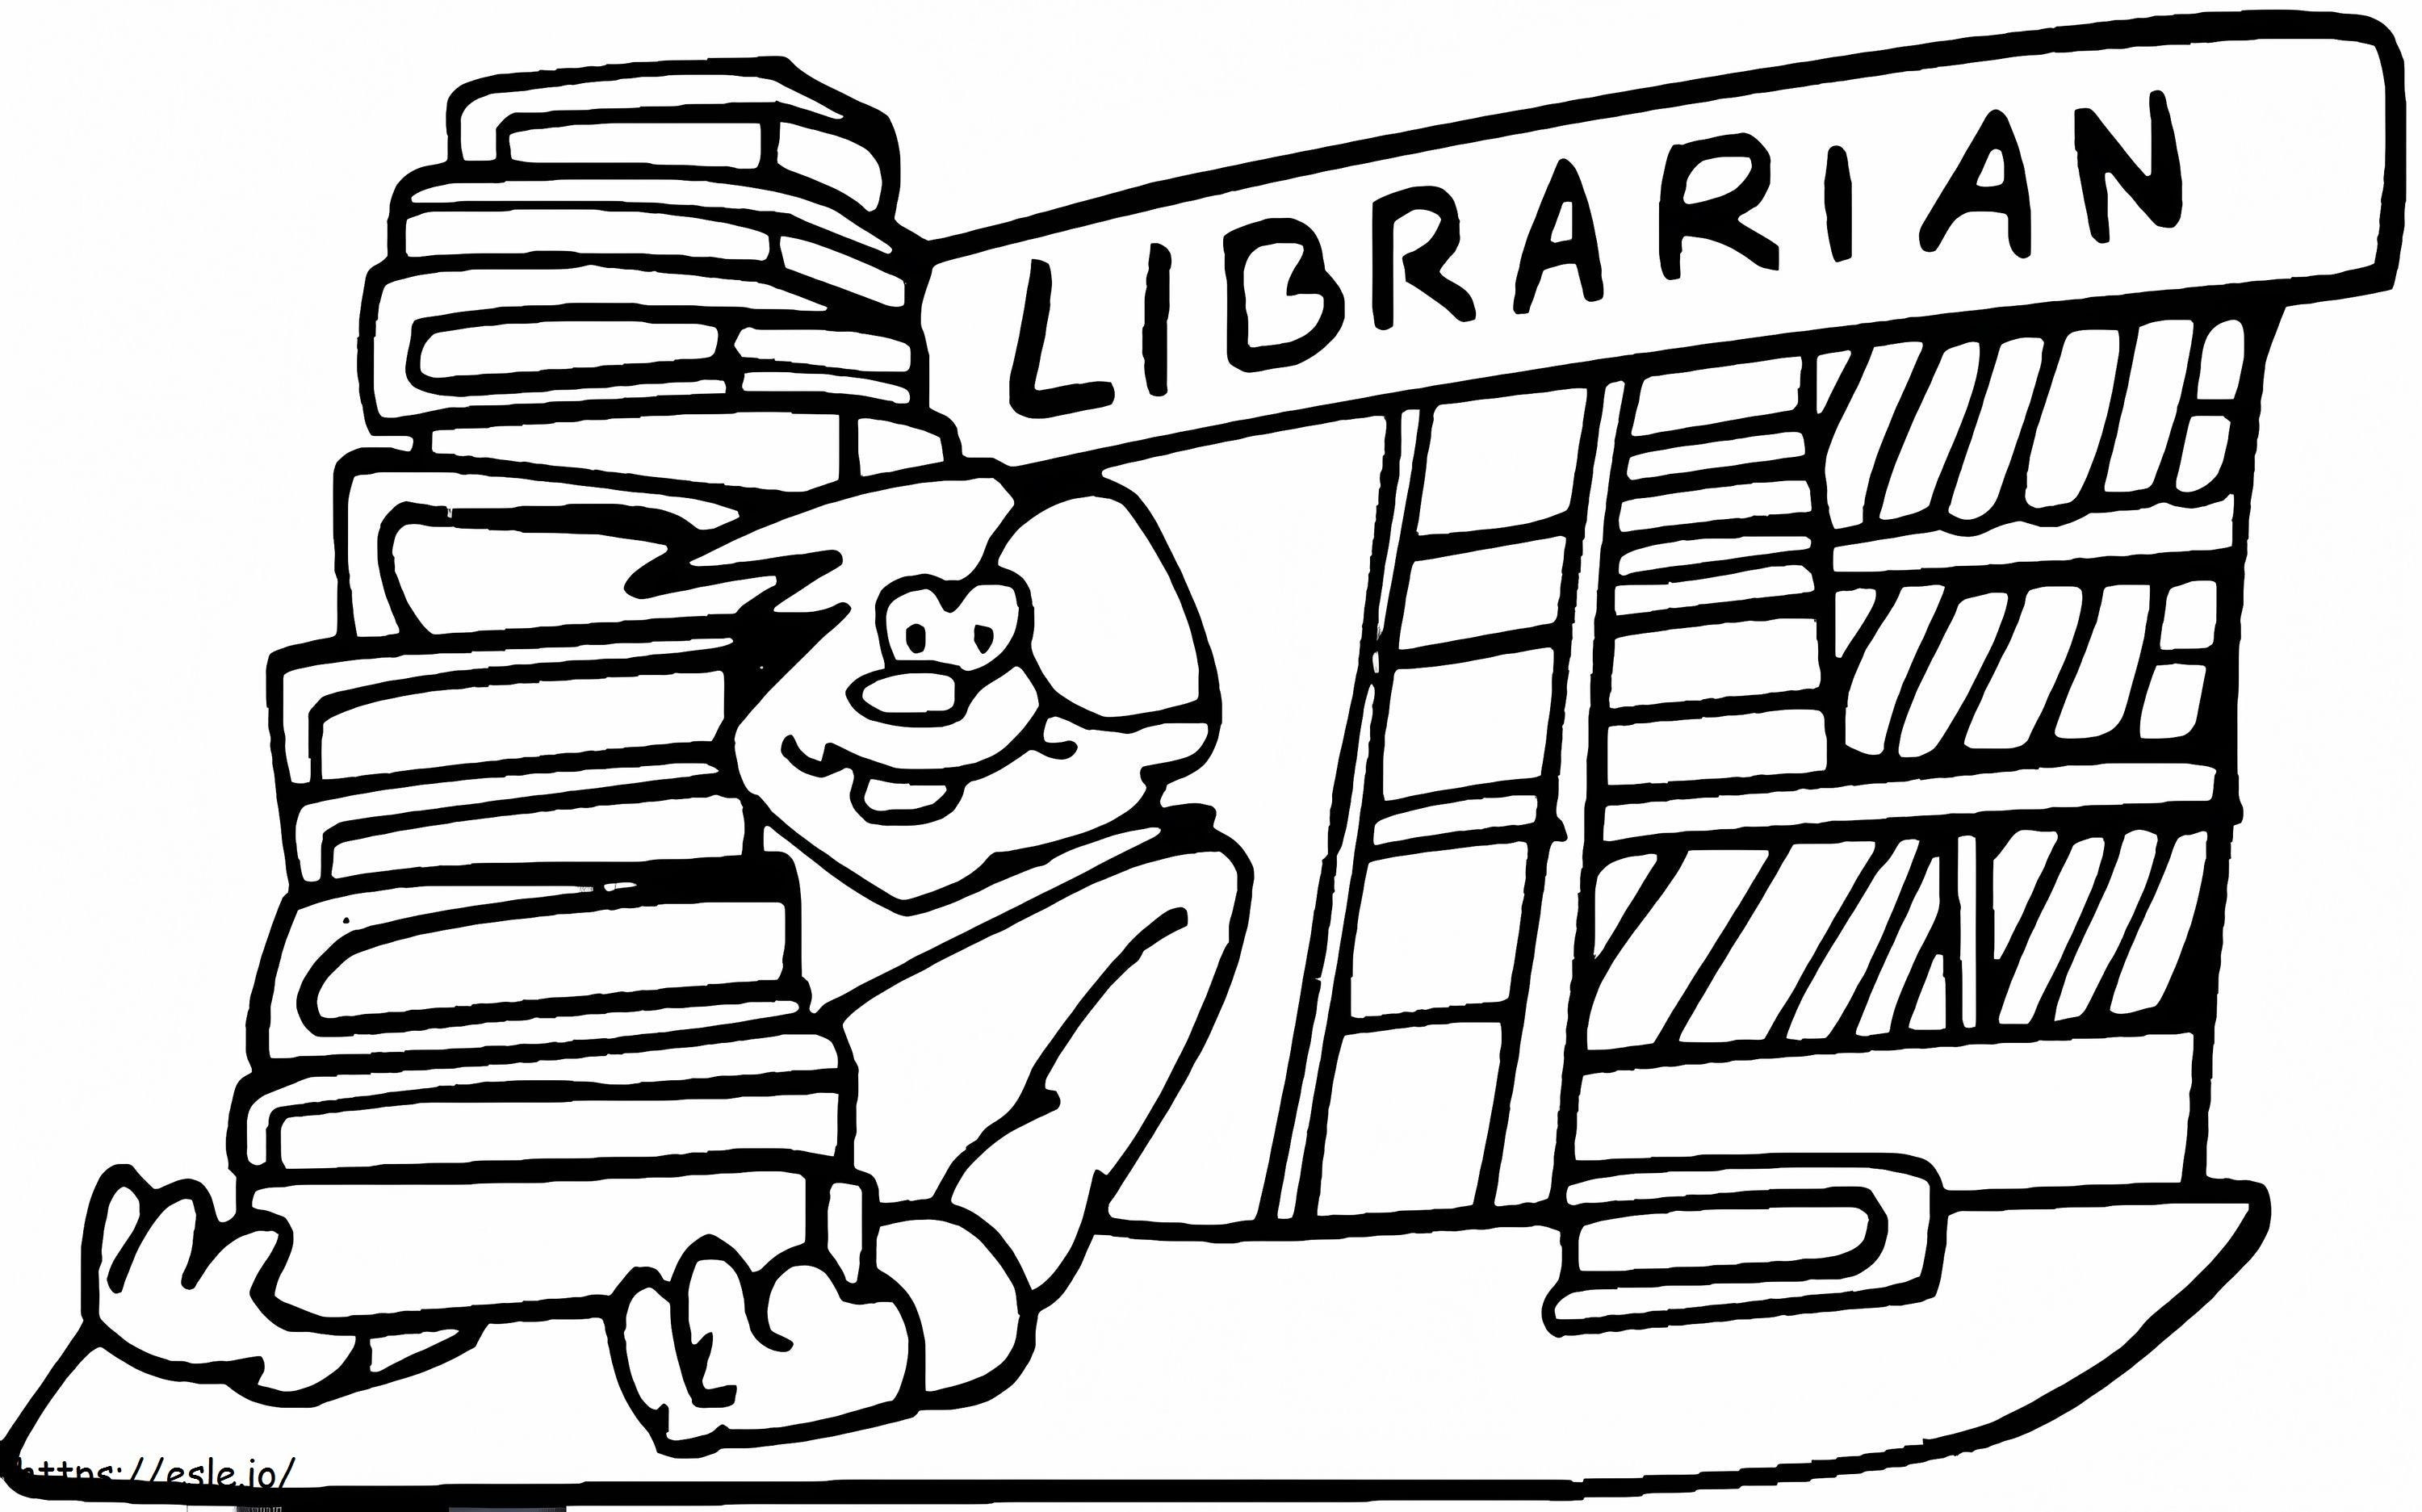 Librarian 6 coloring page